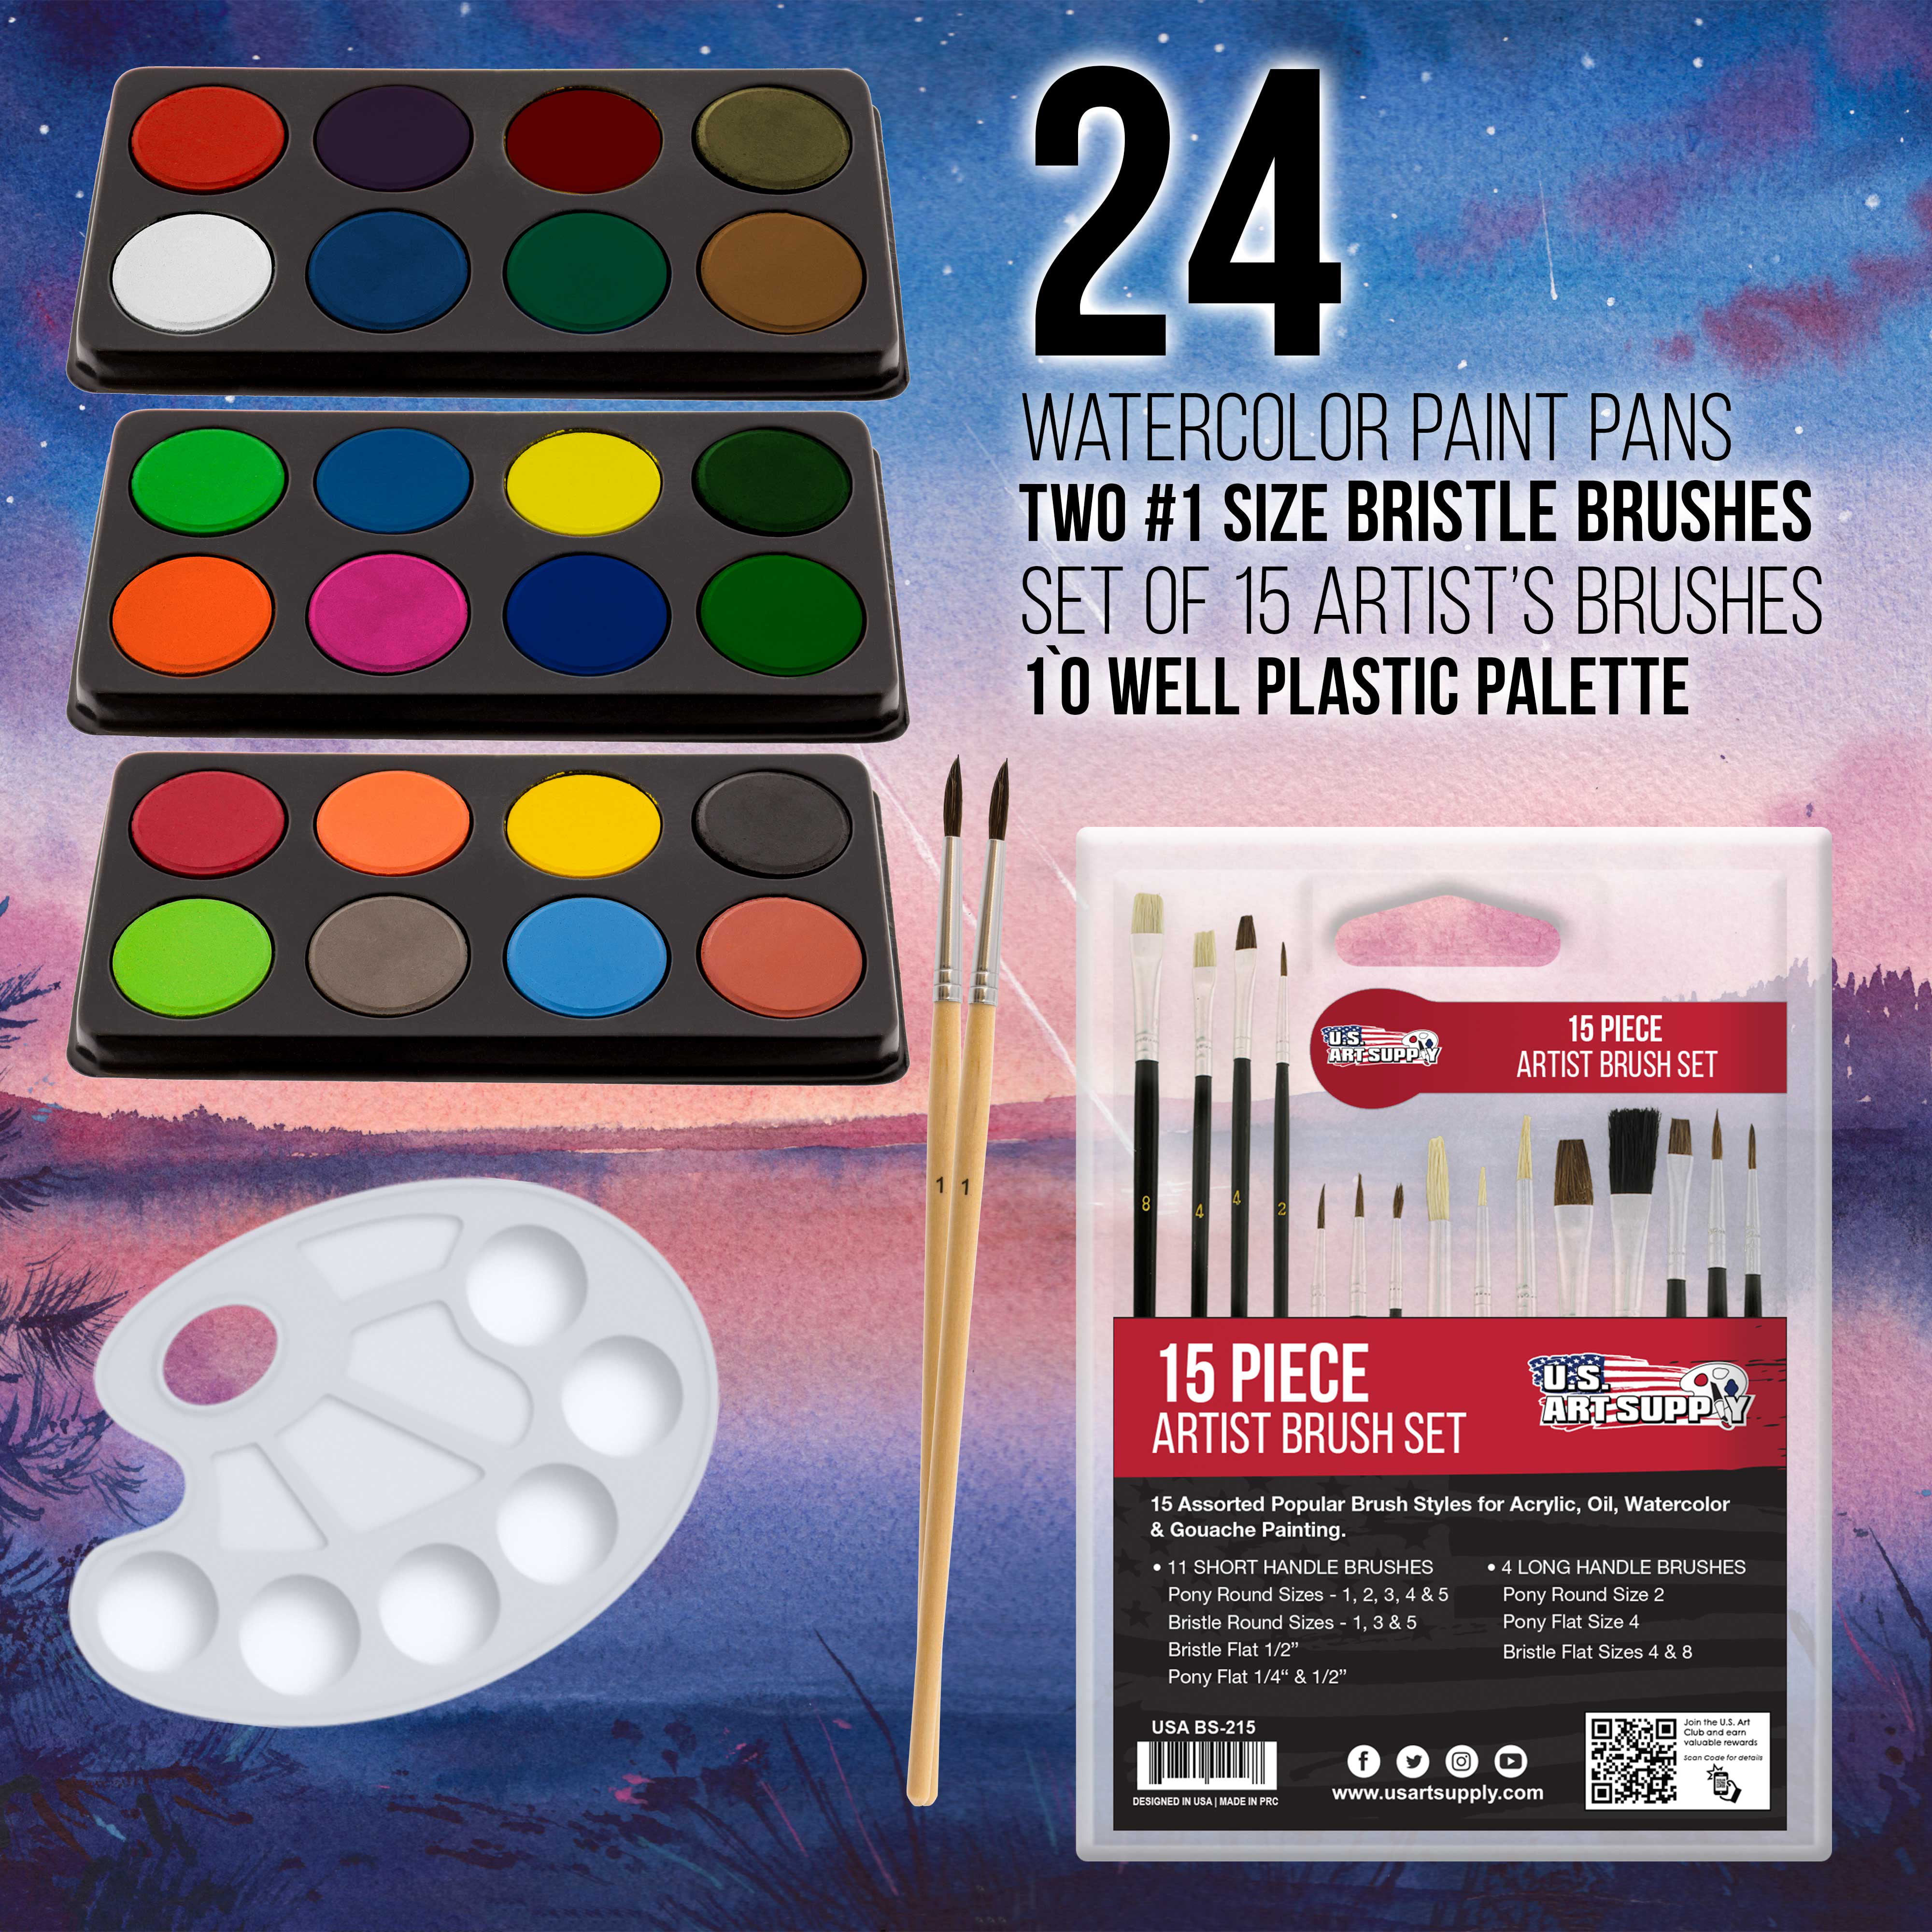 US Art Supply 82 Piece Deluxe Art Creativity Set in Wooden Case with BONUS 20 additional pieces